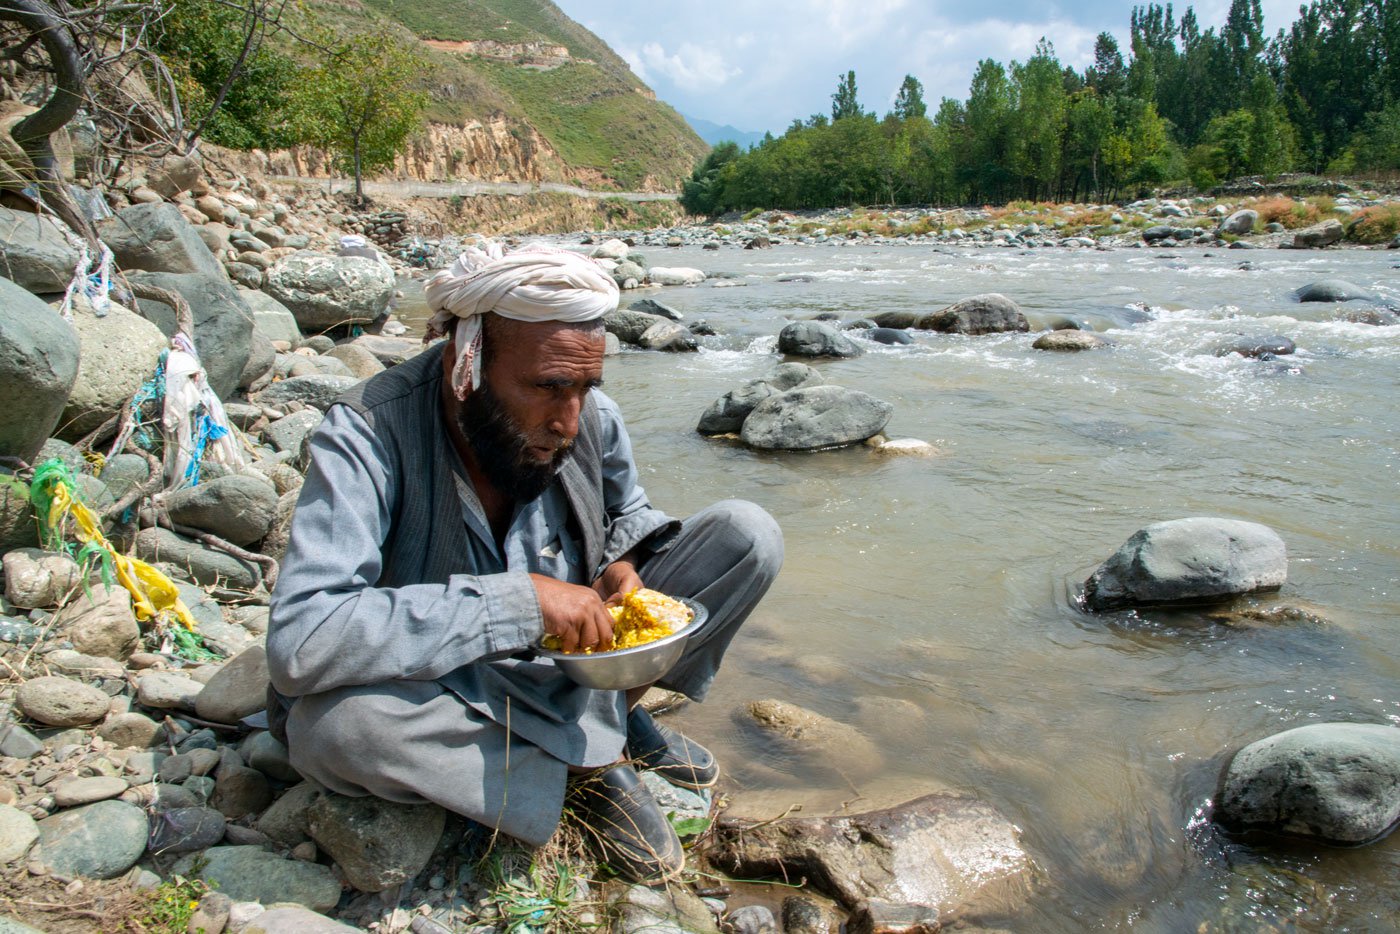 Bakarwals often try and camp near a water source. Mohammad Yusuf Kandal eating lunch near the Indus river